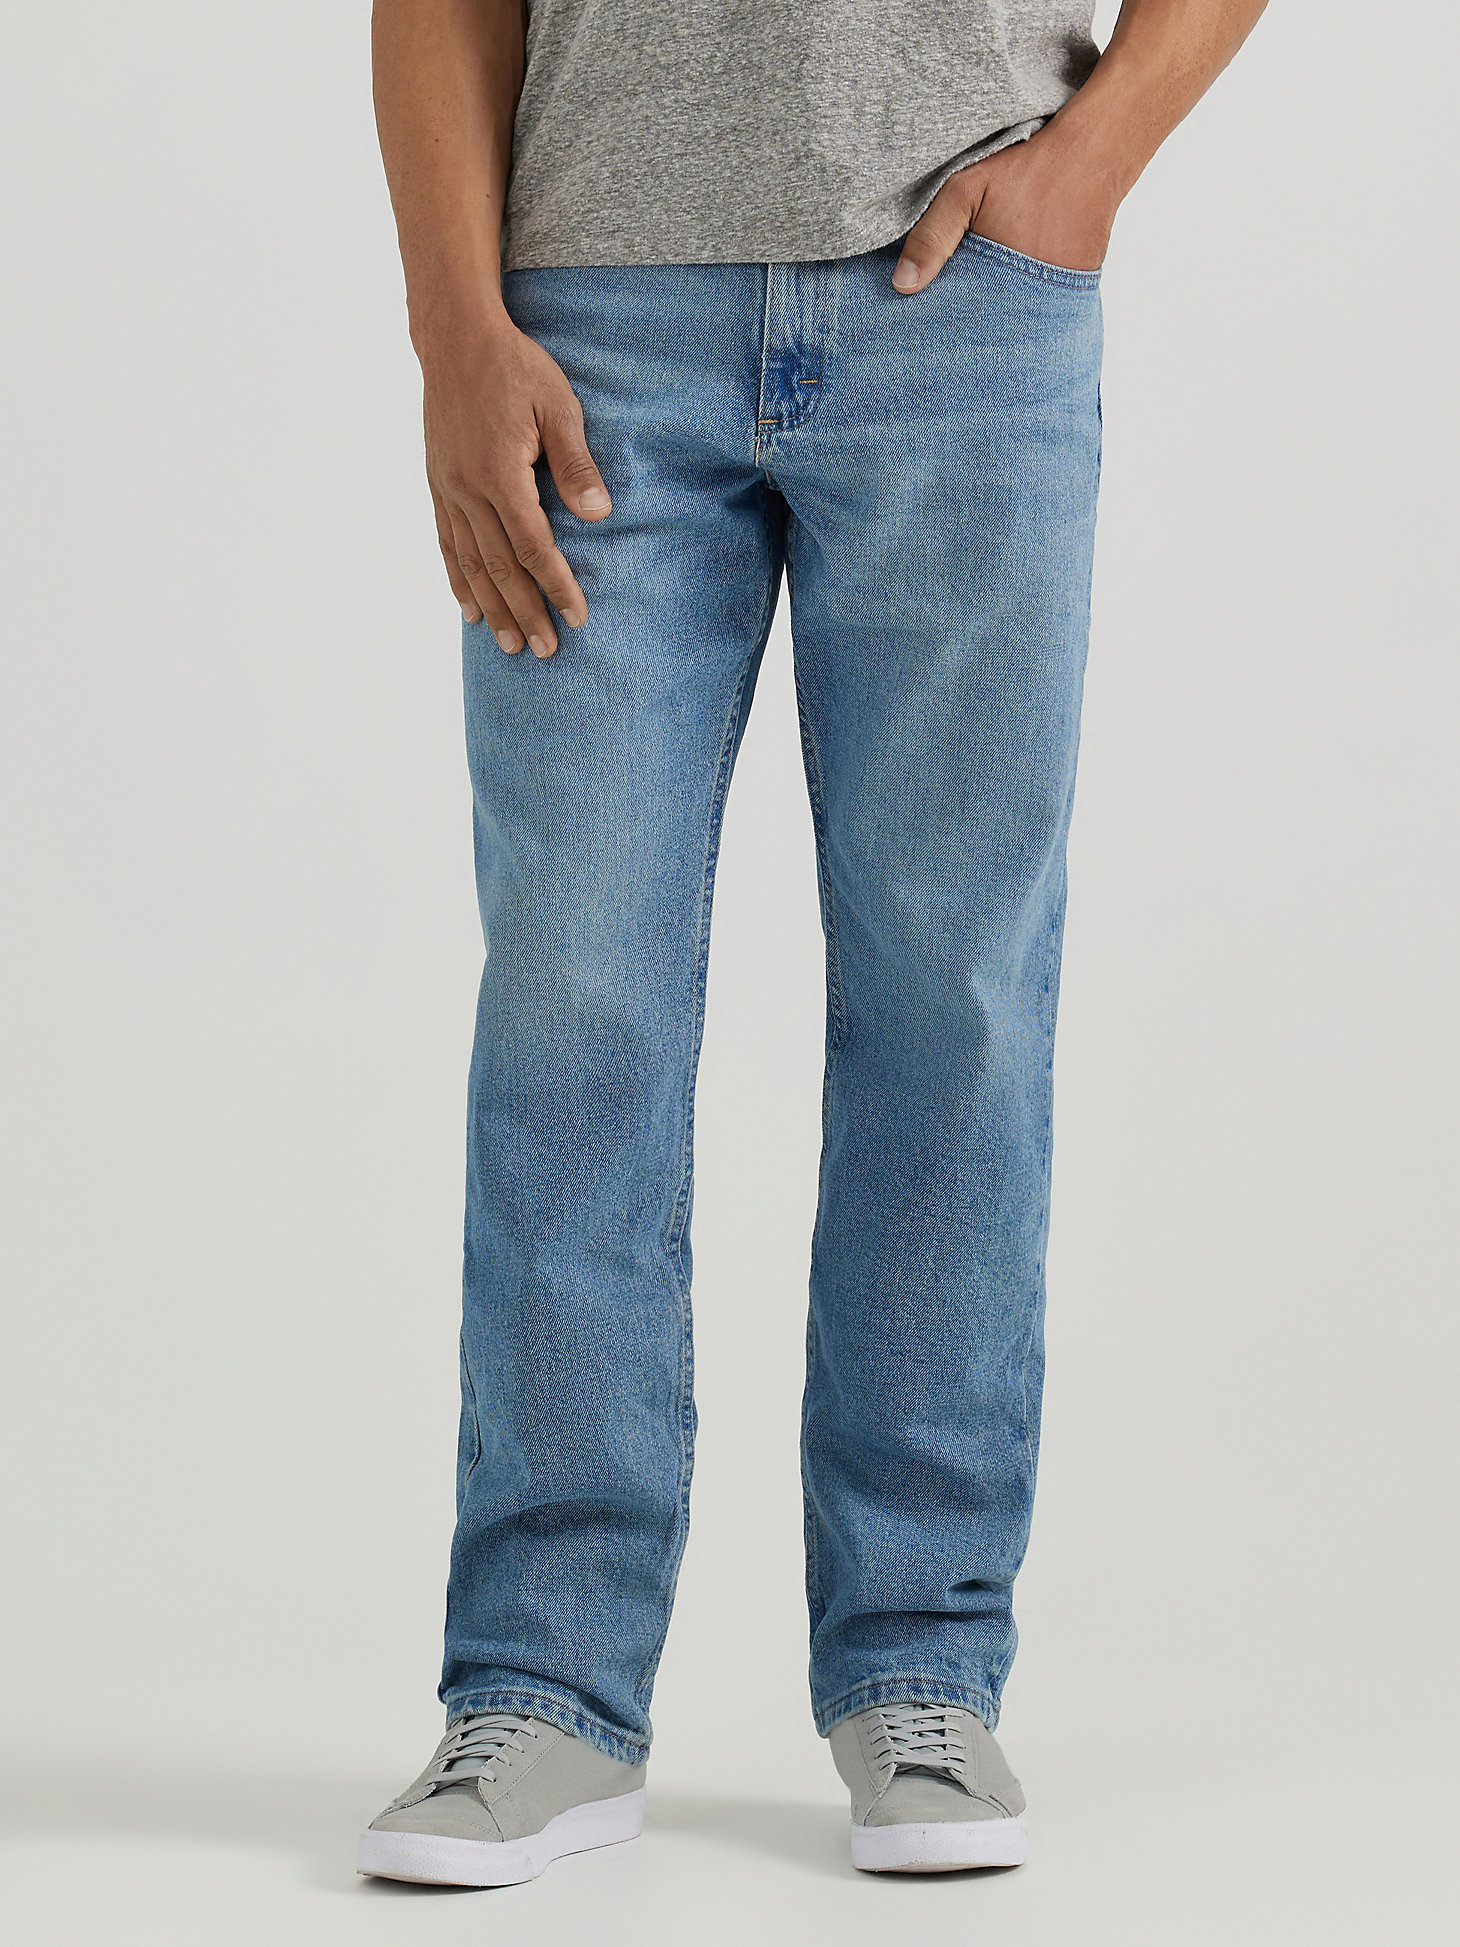 Wrangler® Five Star Premium Denim Flex for Comfort Relaxed Fit Jean in Bleached Tint main view